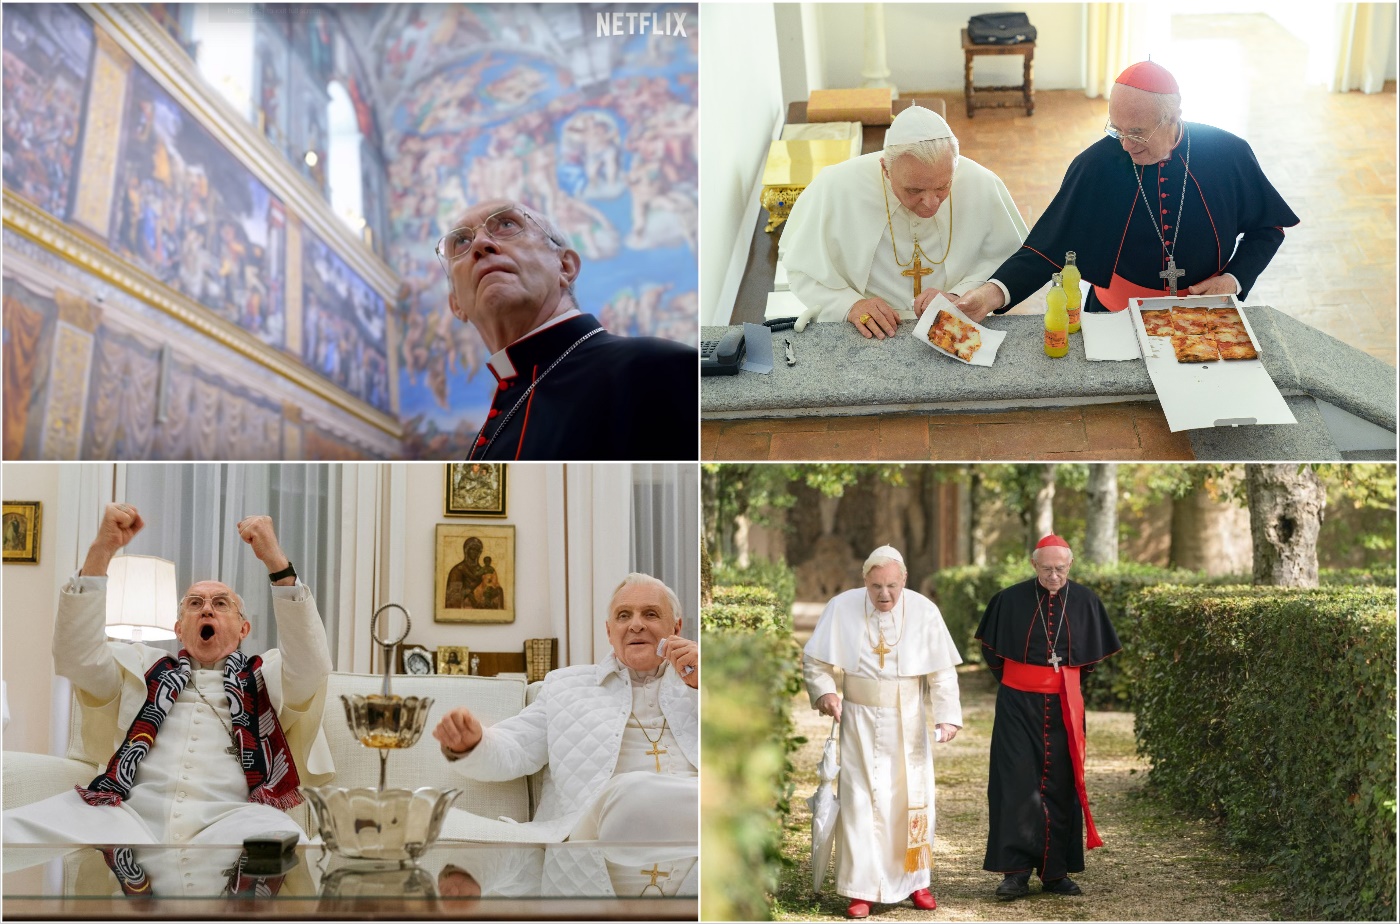 Anthony Hopkins and Jonathan Pryce - The Two Popes